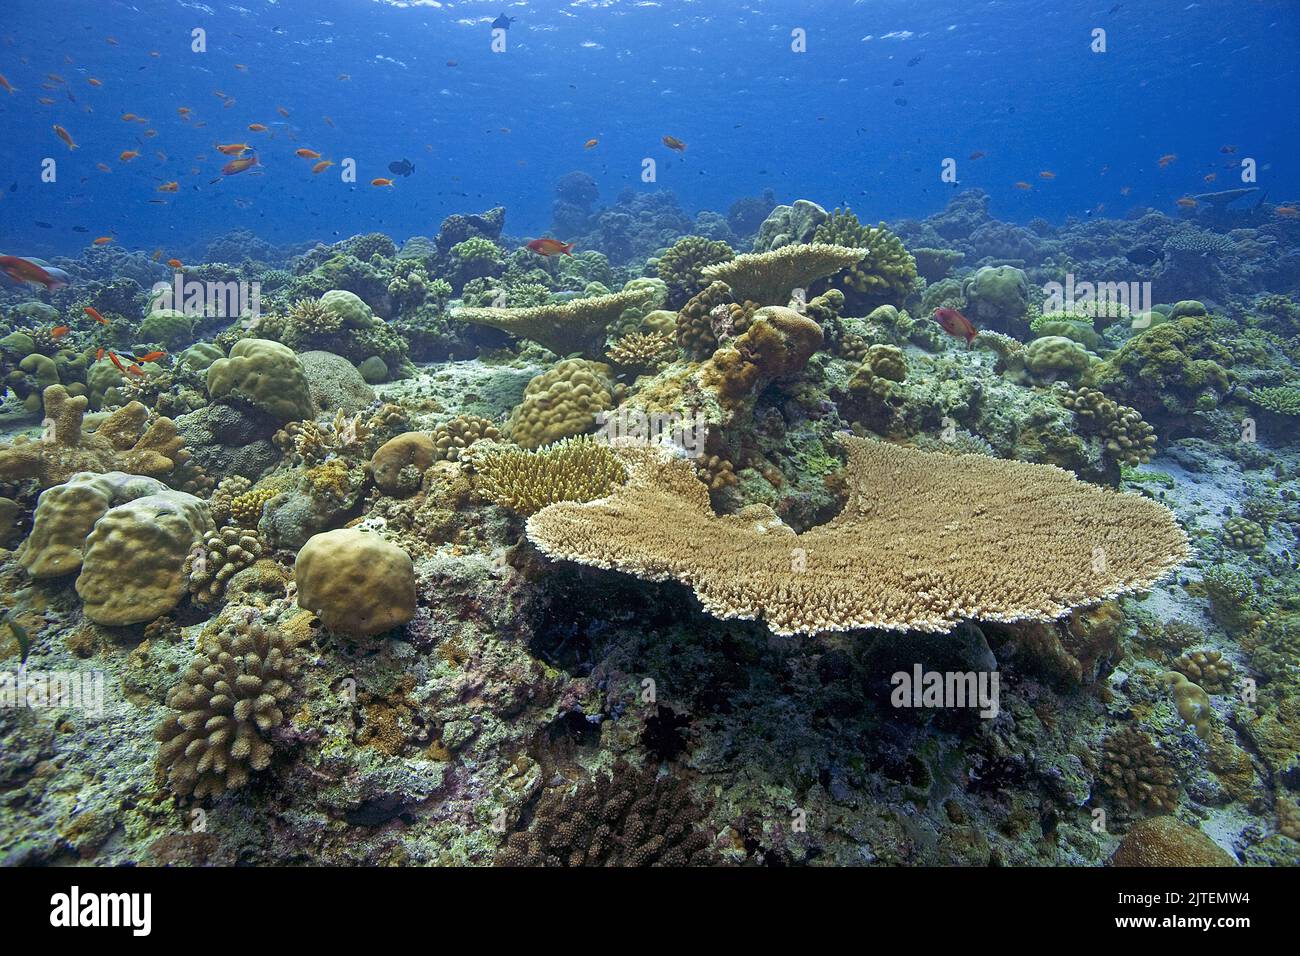 Intact coral reef with dominating stone corals, Maldives, Indian ocean, Asia Stock Photo